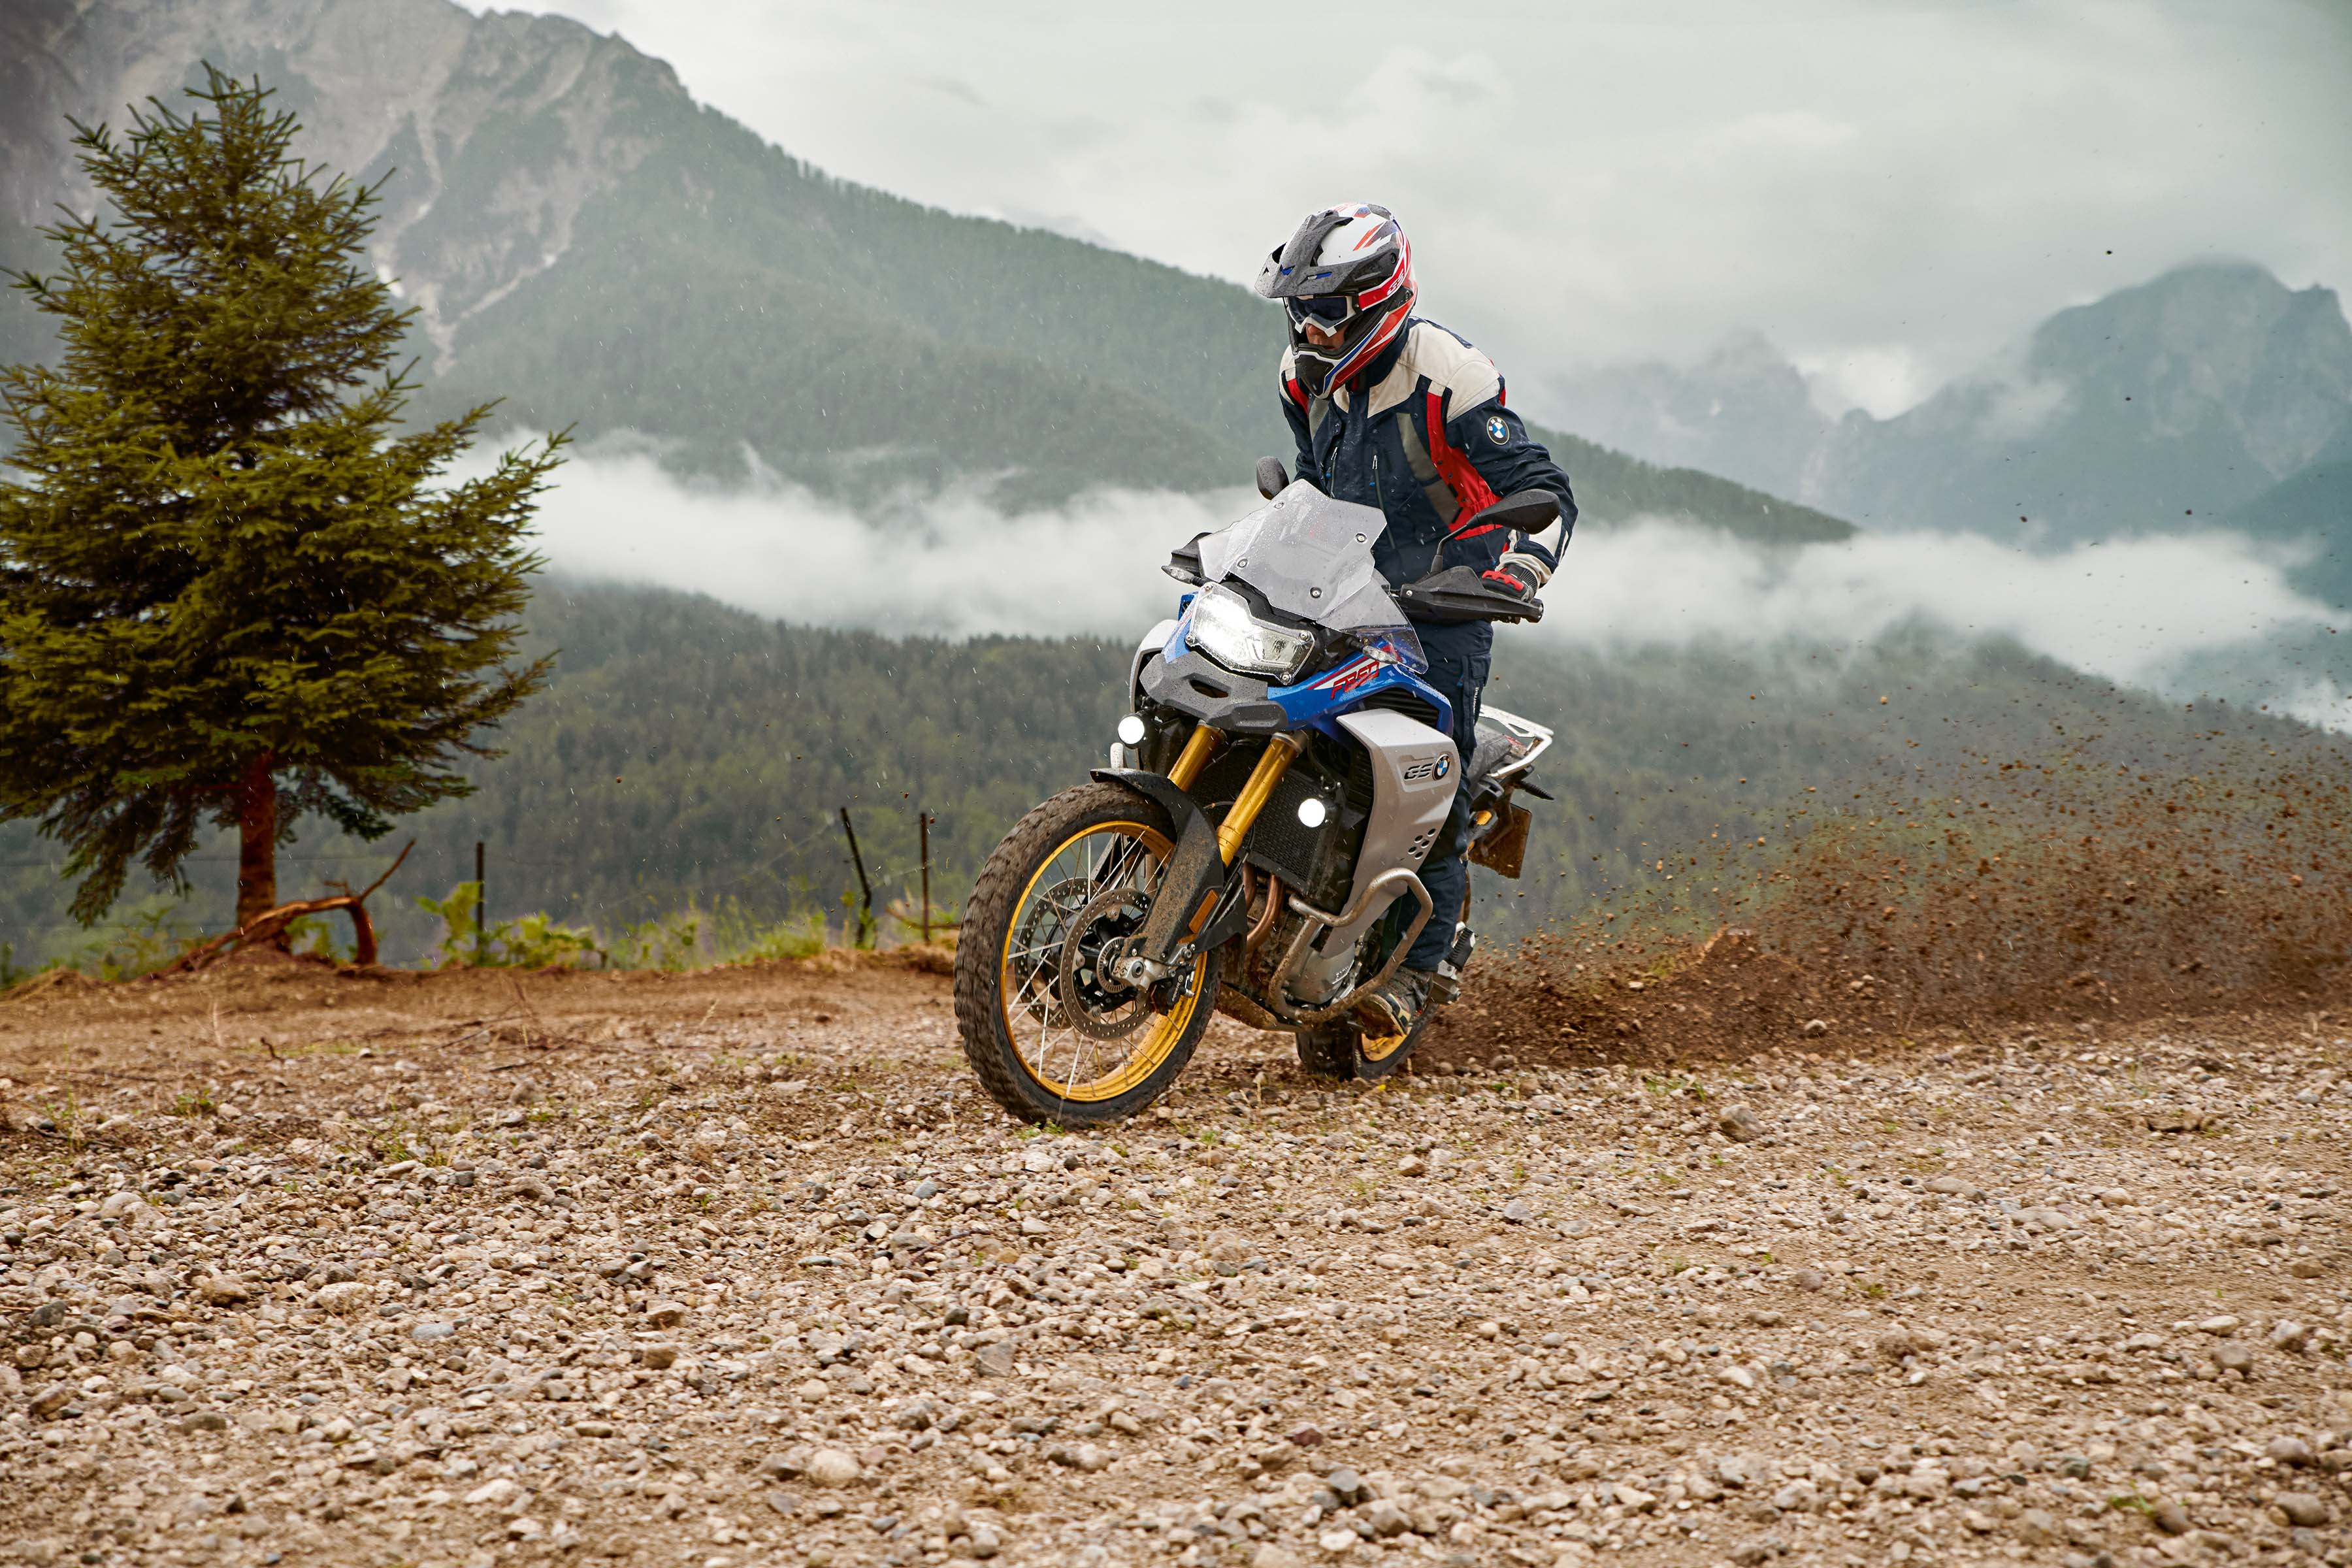 BMW F850GS Adventure Brings the Middleweight ADV & Rubber